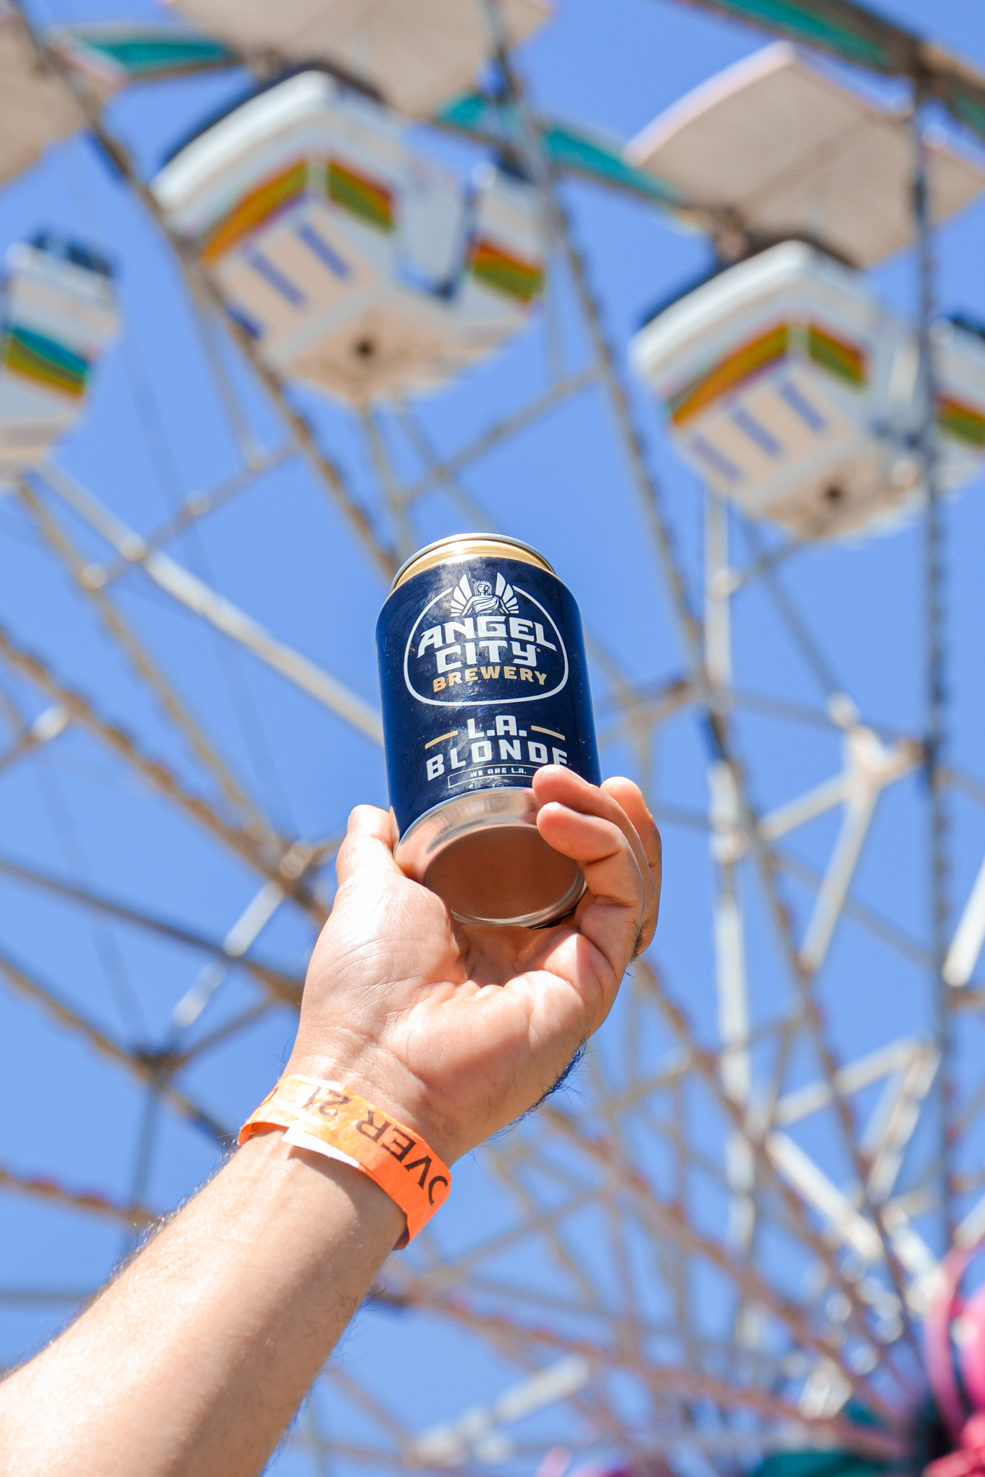 Can of L.A. Blonde being hoisted in air in front of ferris wheel at the California State Fair